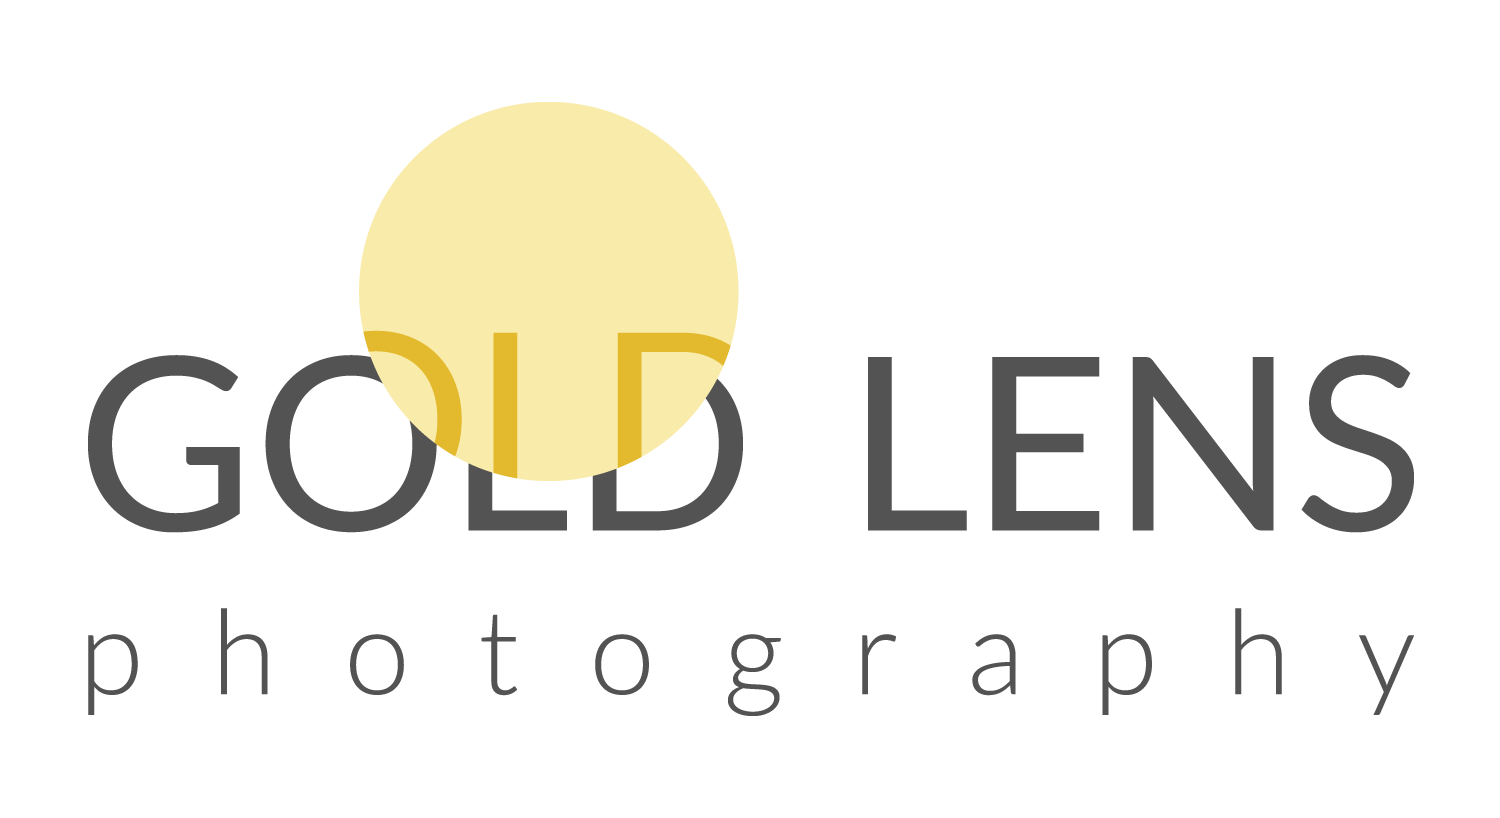 Gold Lens Photography white logo with black letters and yellow circle